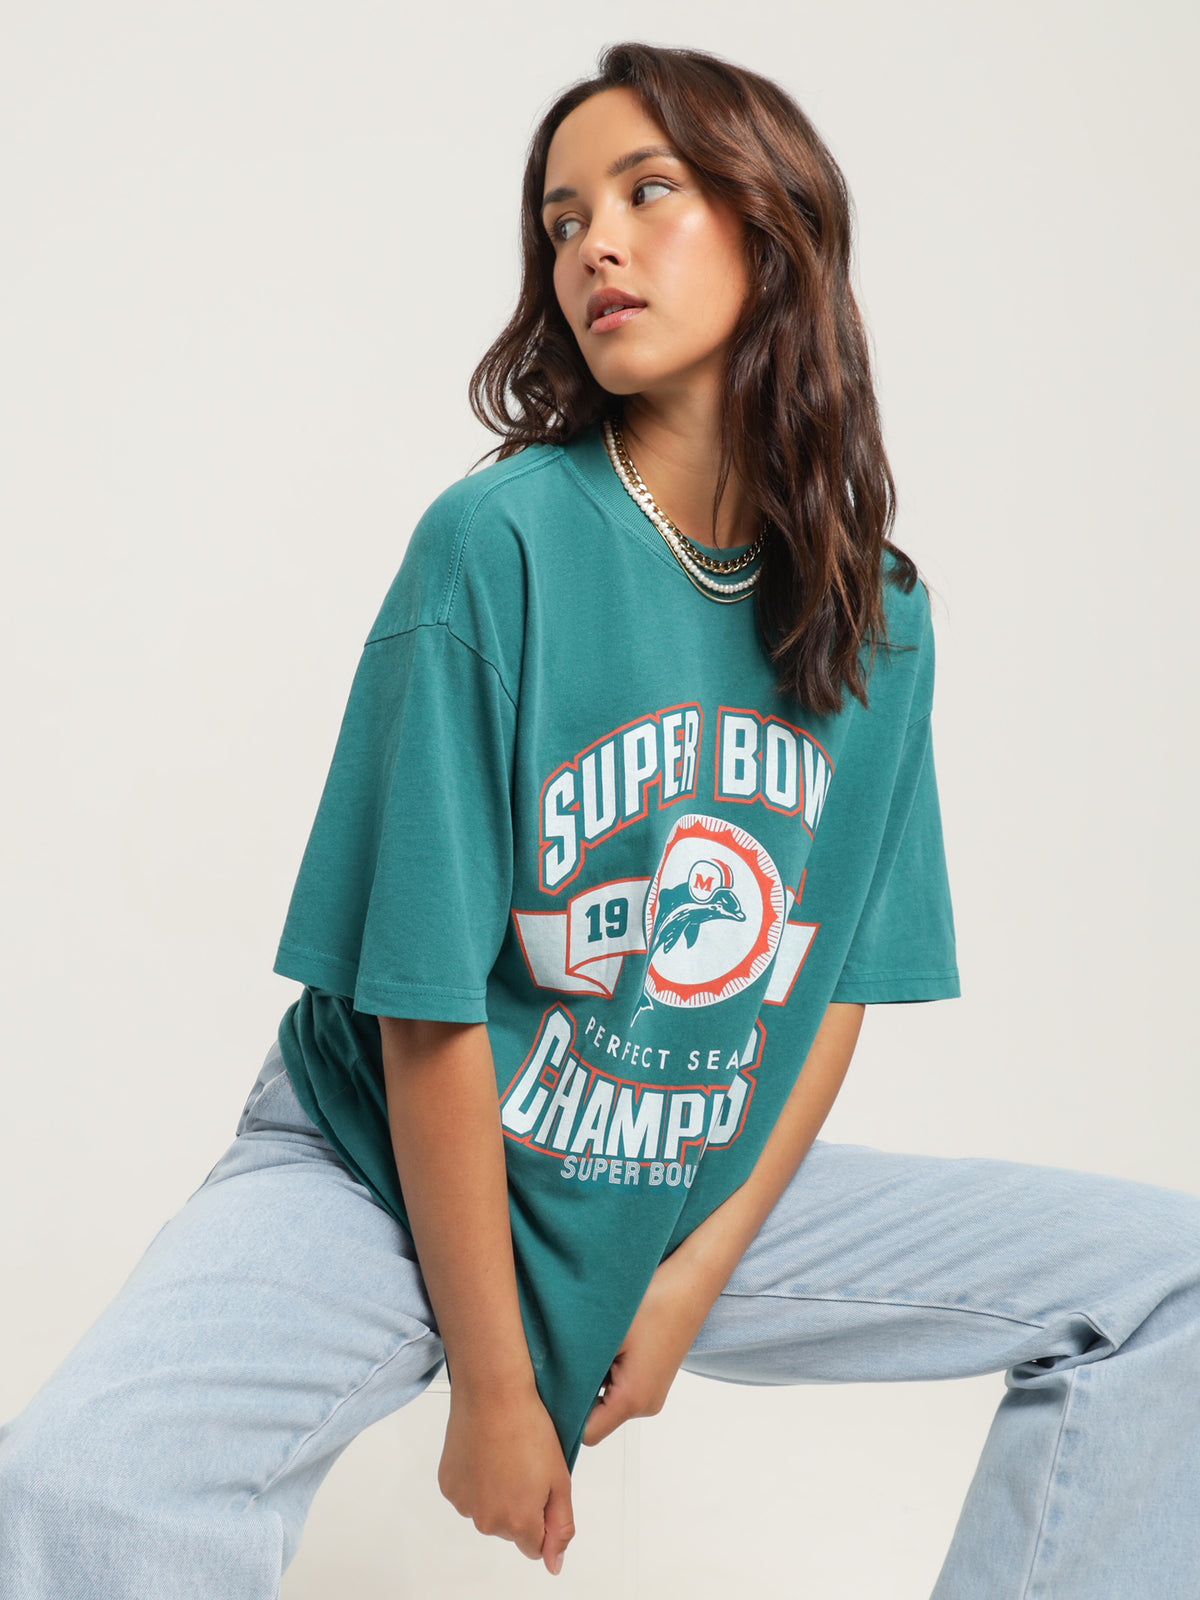 Perfect Season T-Shirt in Faded Teal